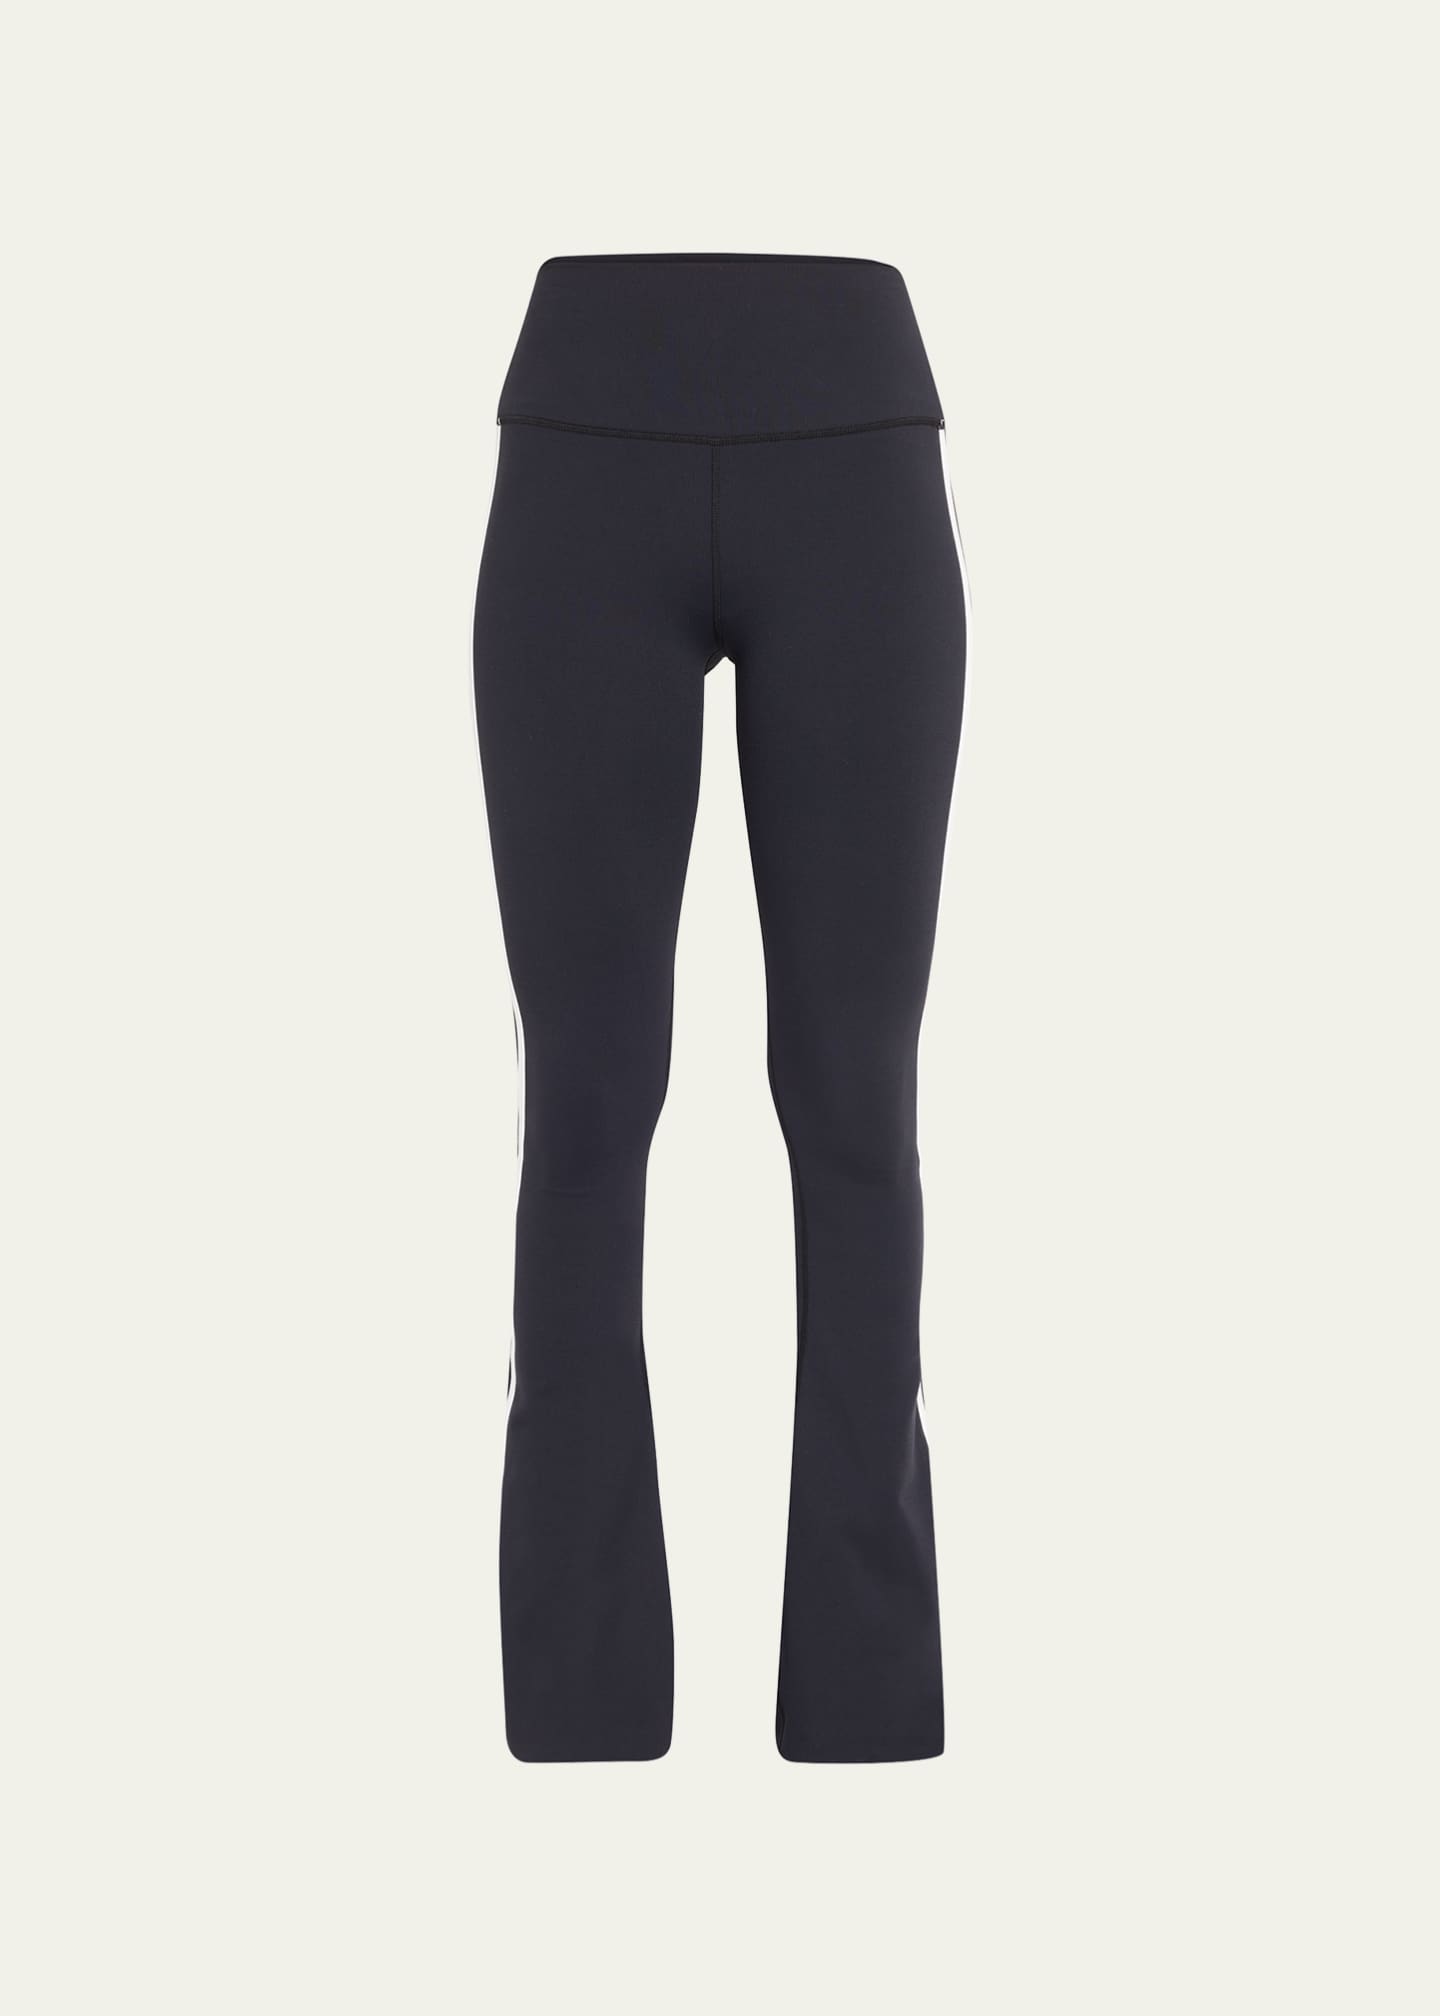 Splits59 Raquel High-Waisted Split Hem Flare Pant  Urban Outfitters Hong  Kong - Clothing, Music, Home & Accessories